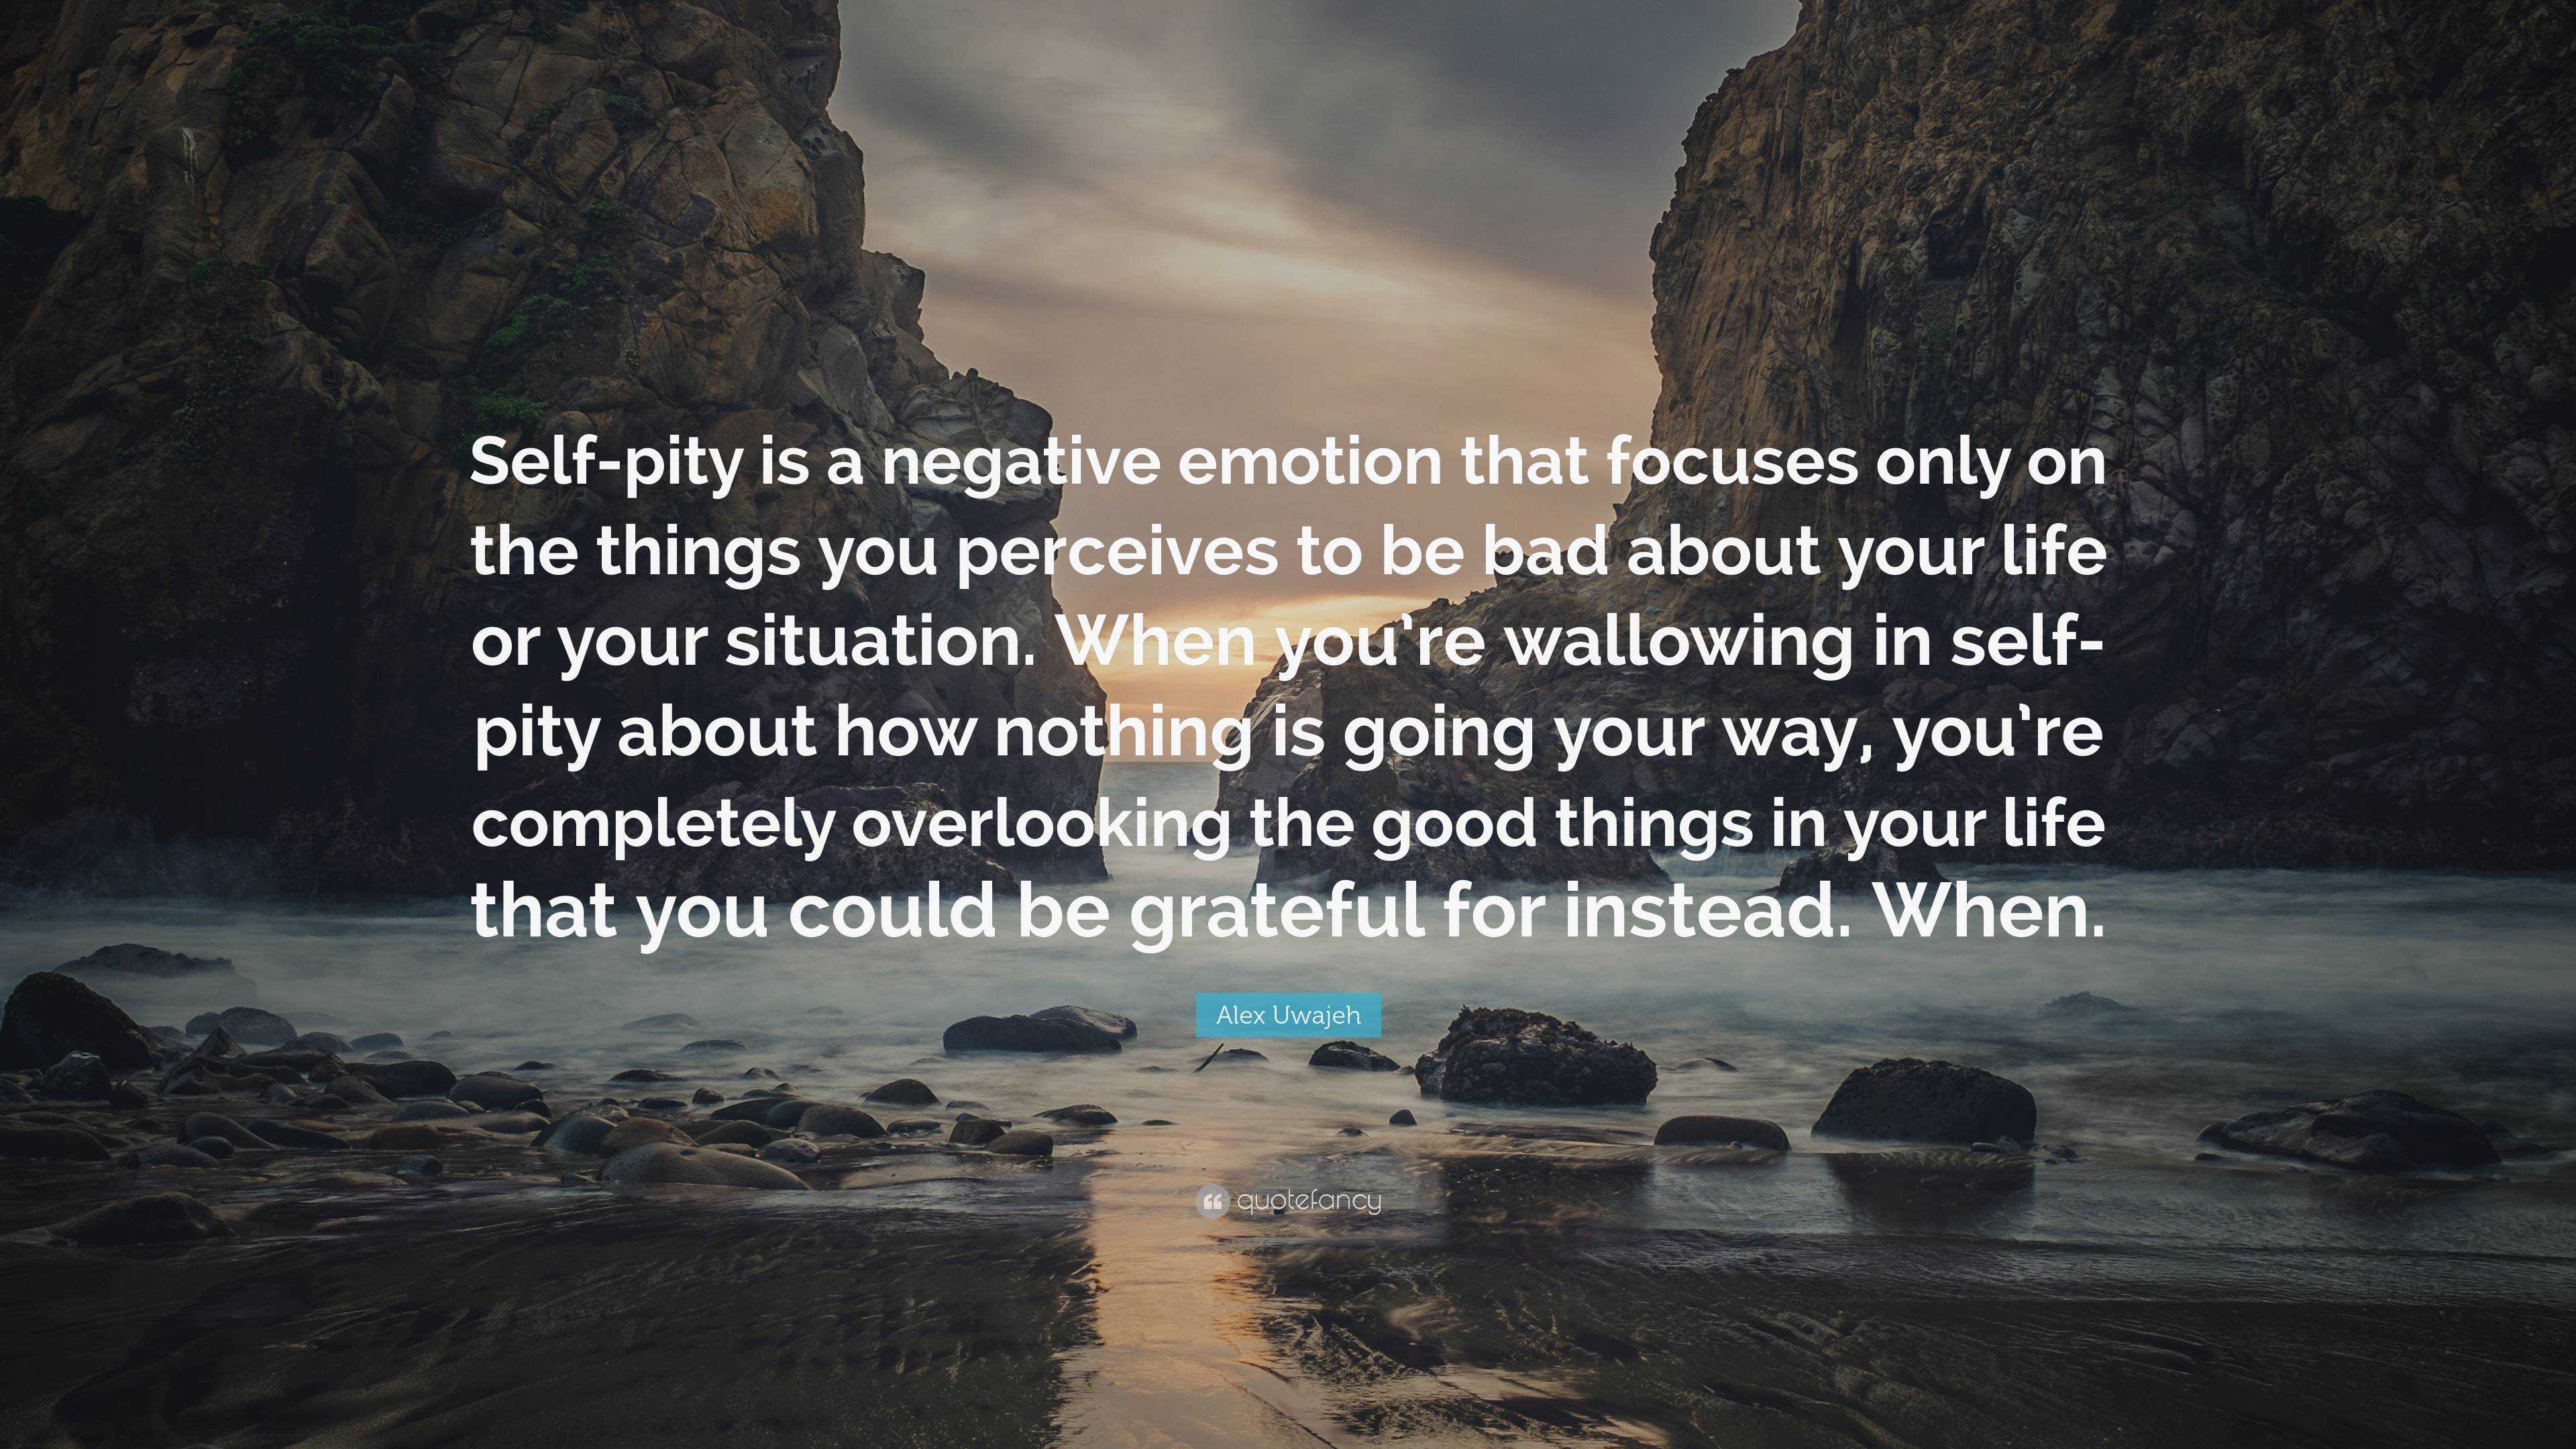 Alex Uwajeh Quote: “Self-pity is a negative emotion that focuses only ...